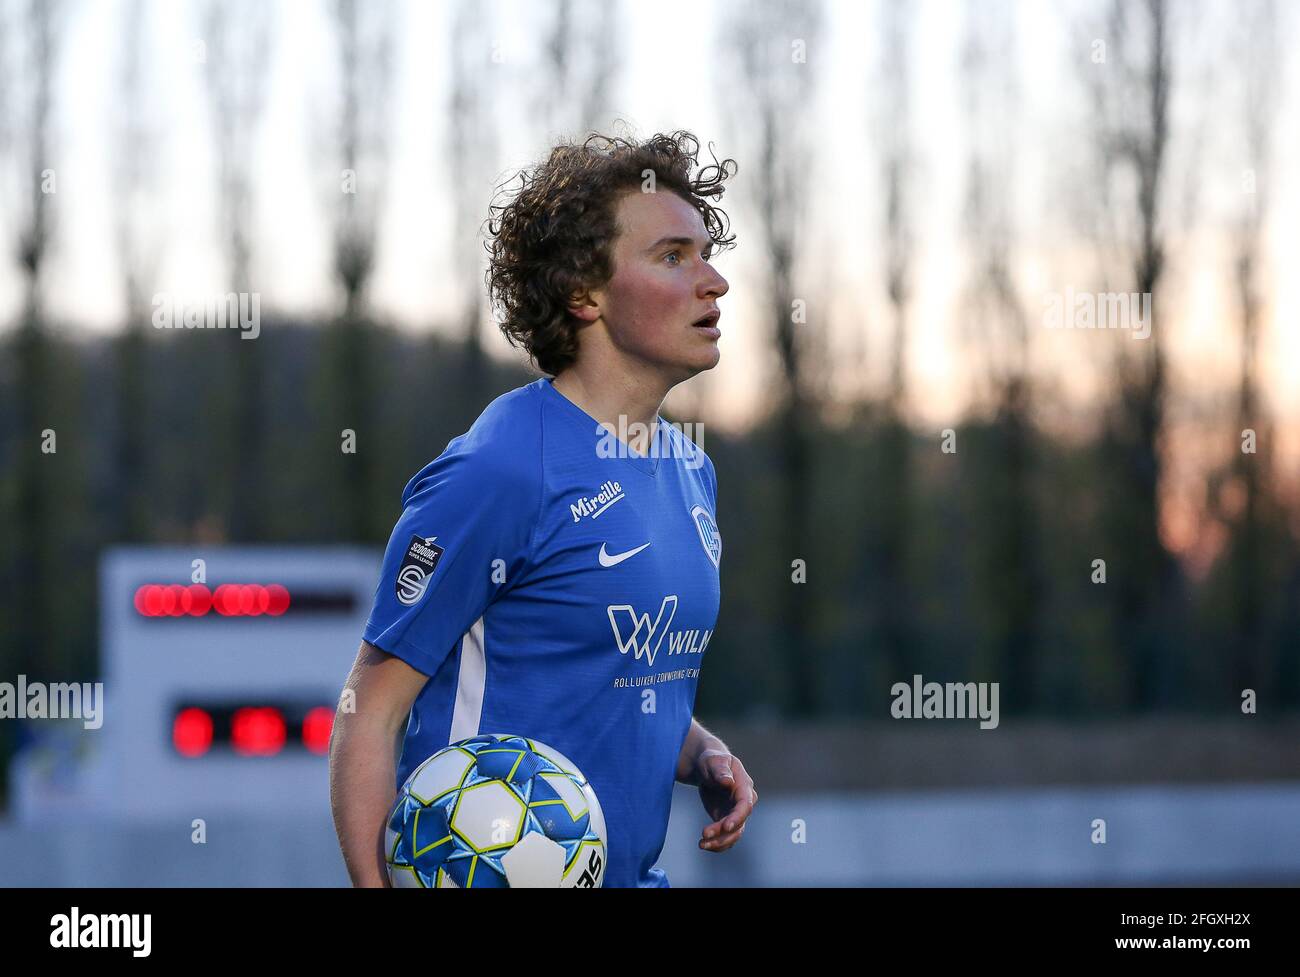 Page 3 - Blauw Wit Photography and Images - Alamy